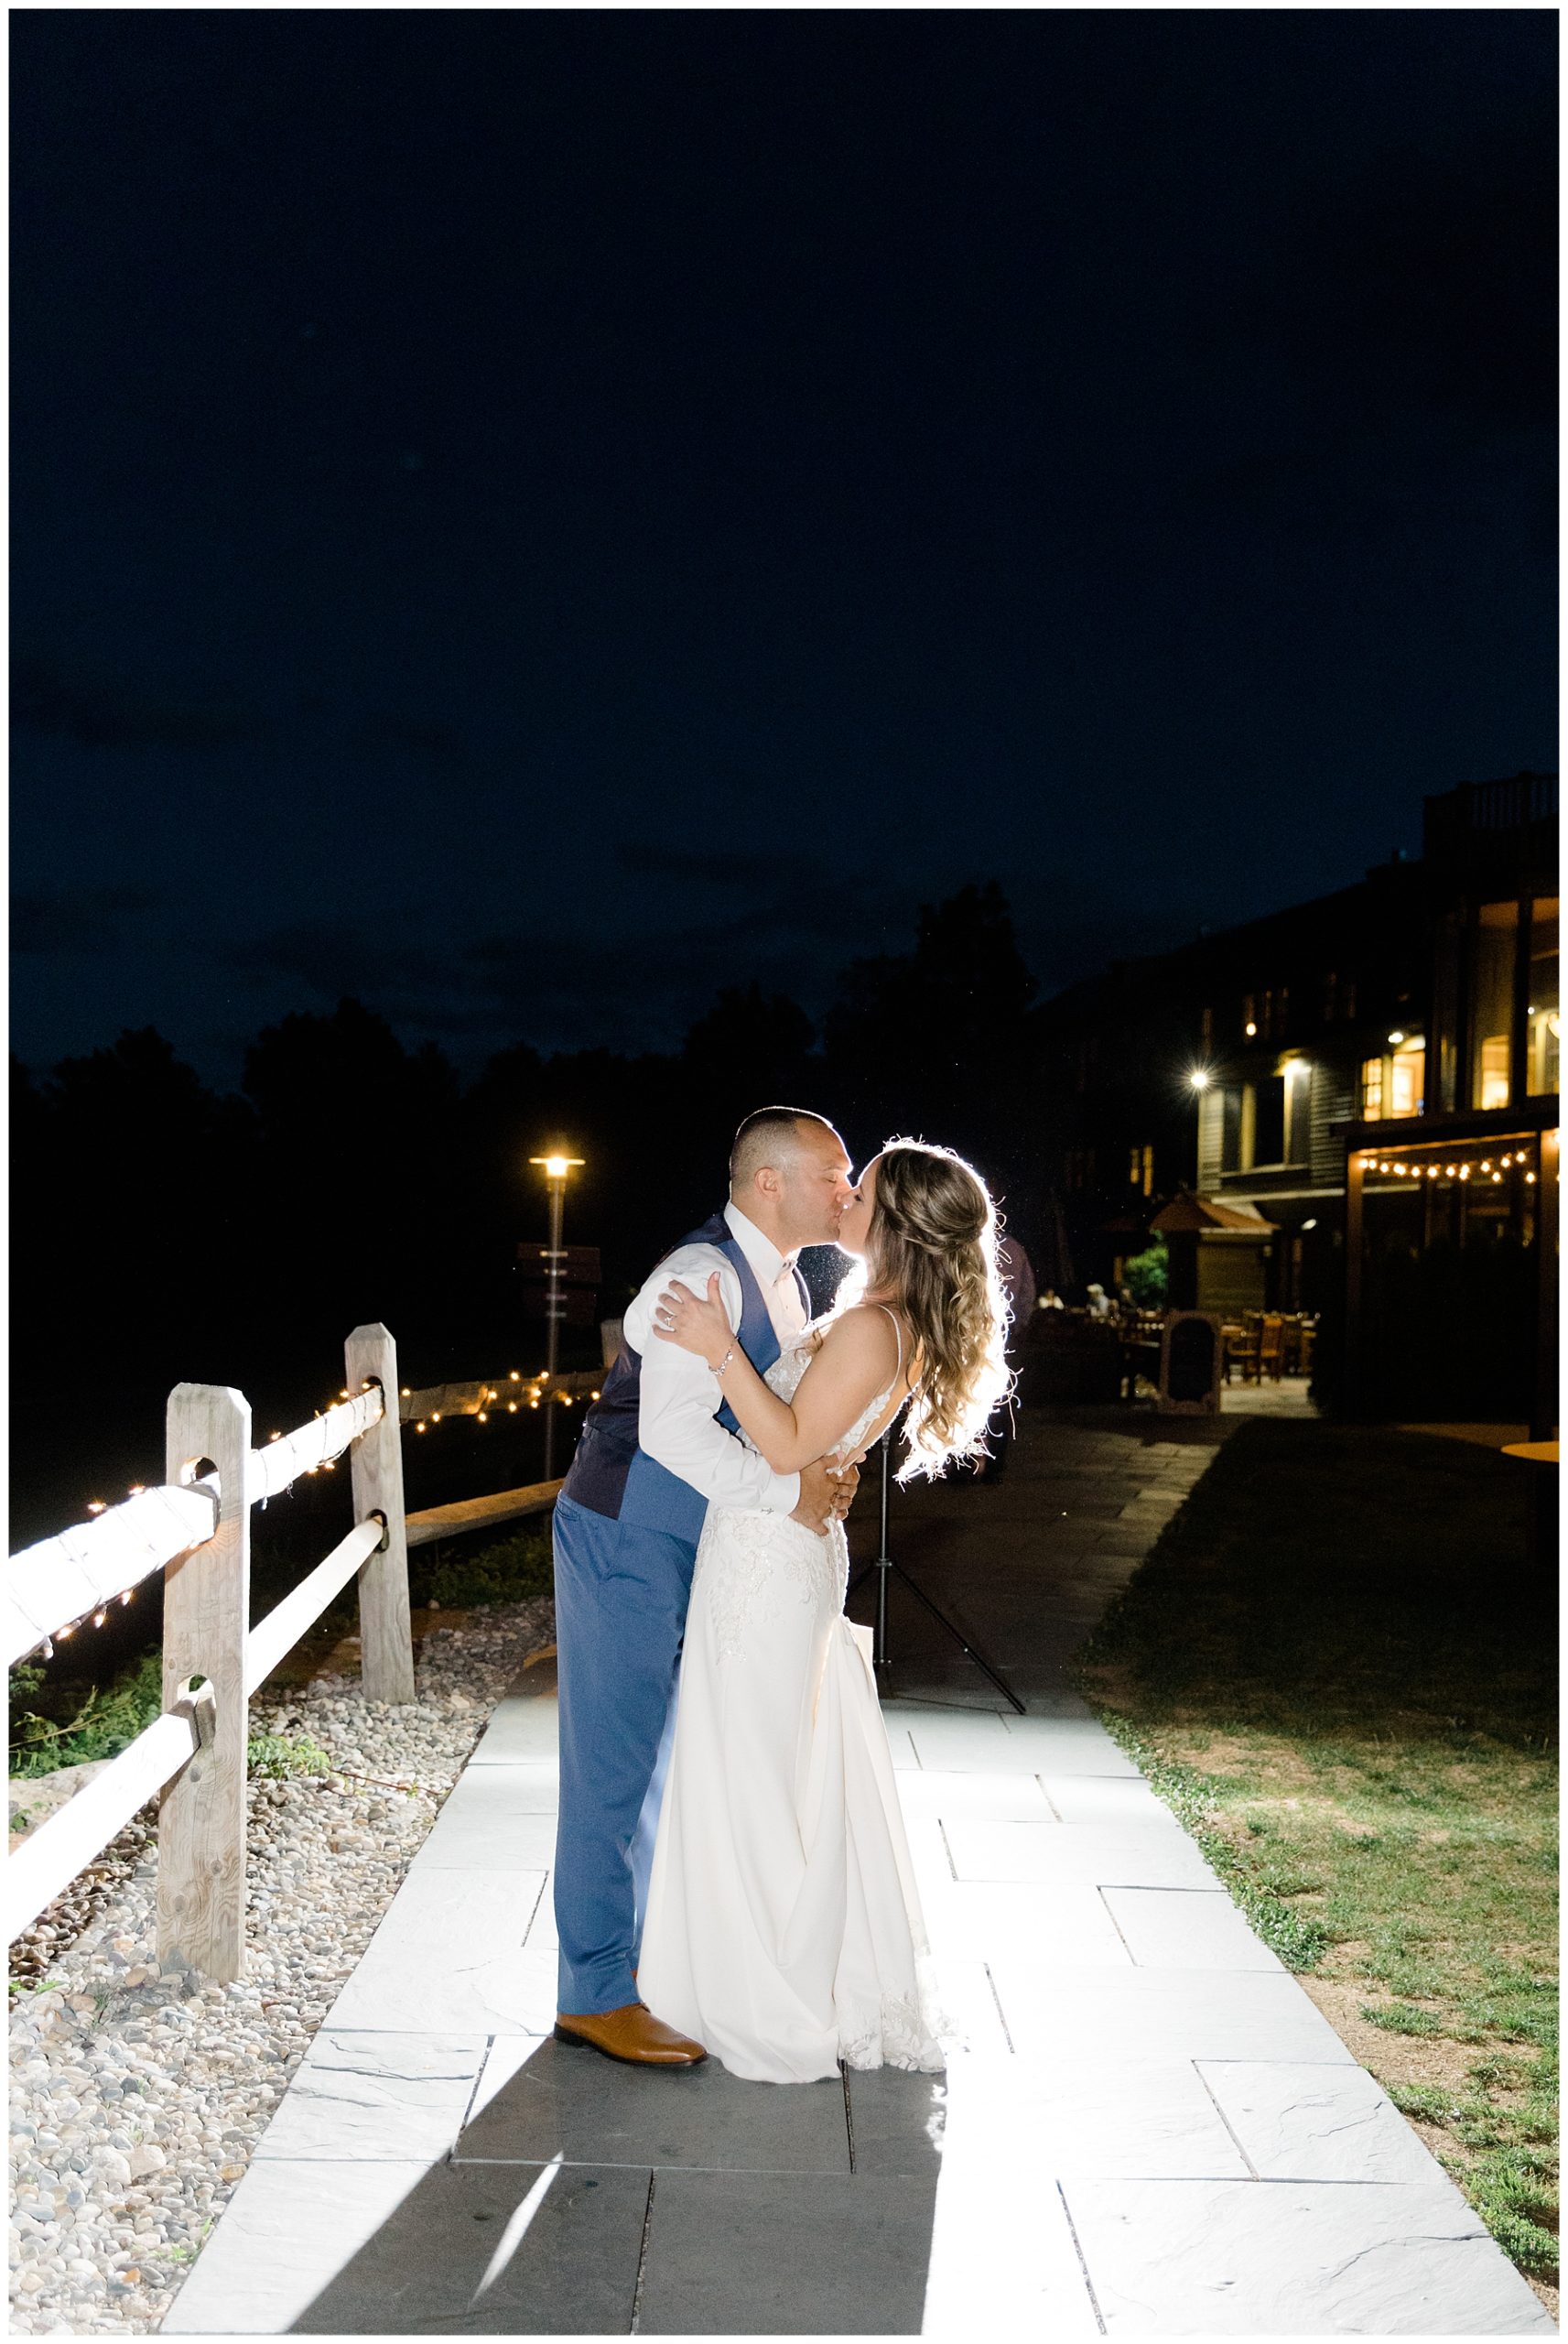 newlyweds kiss outside at the end of their wedding night